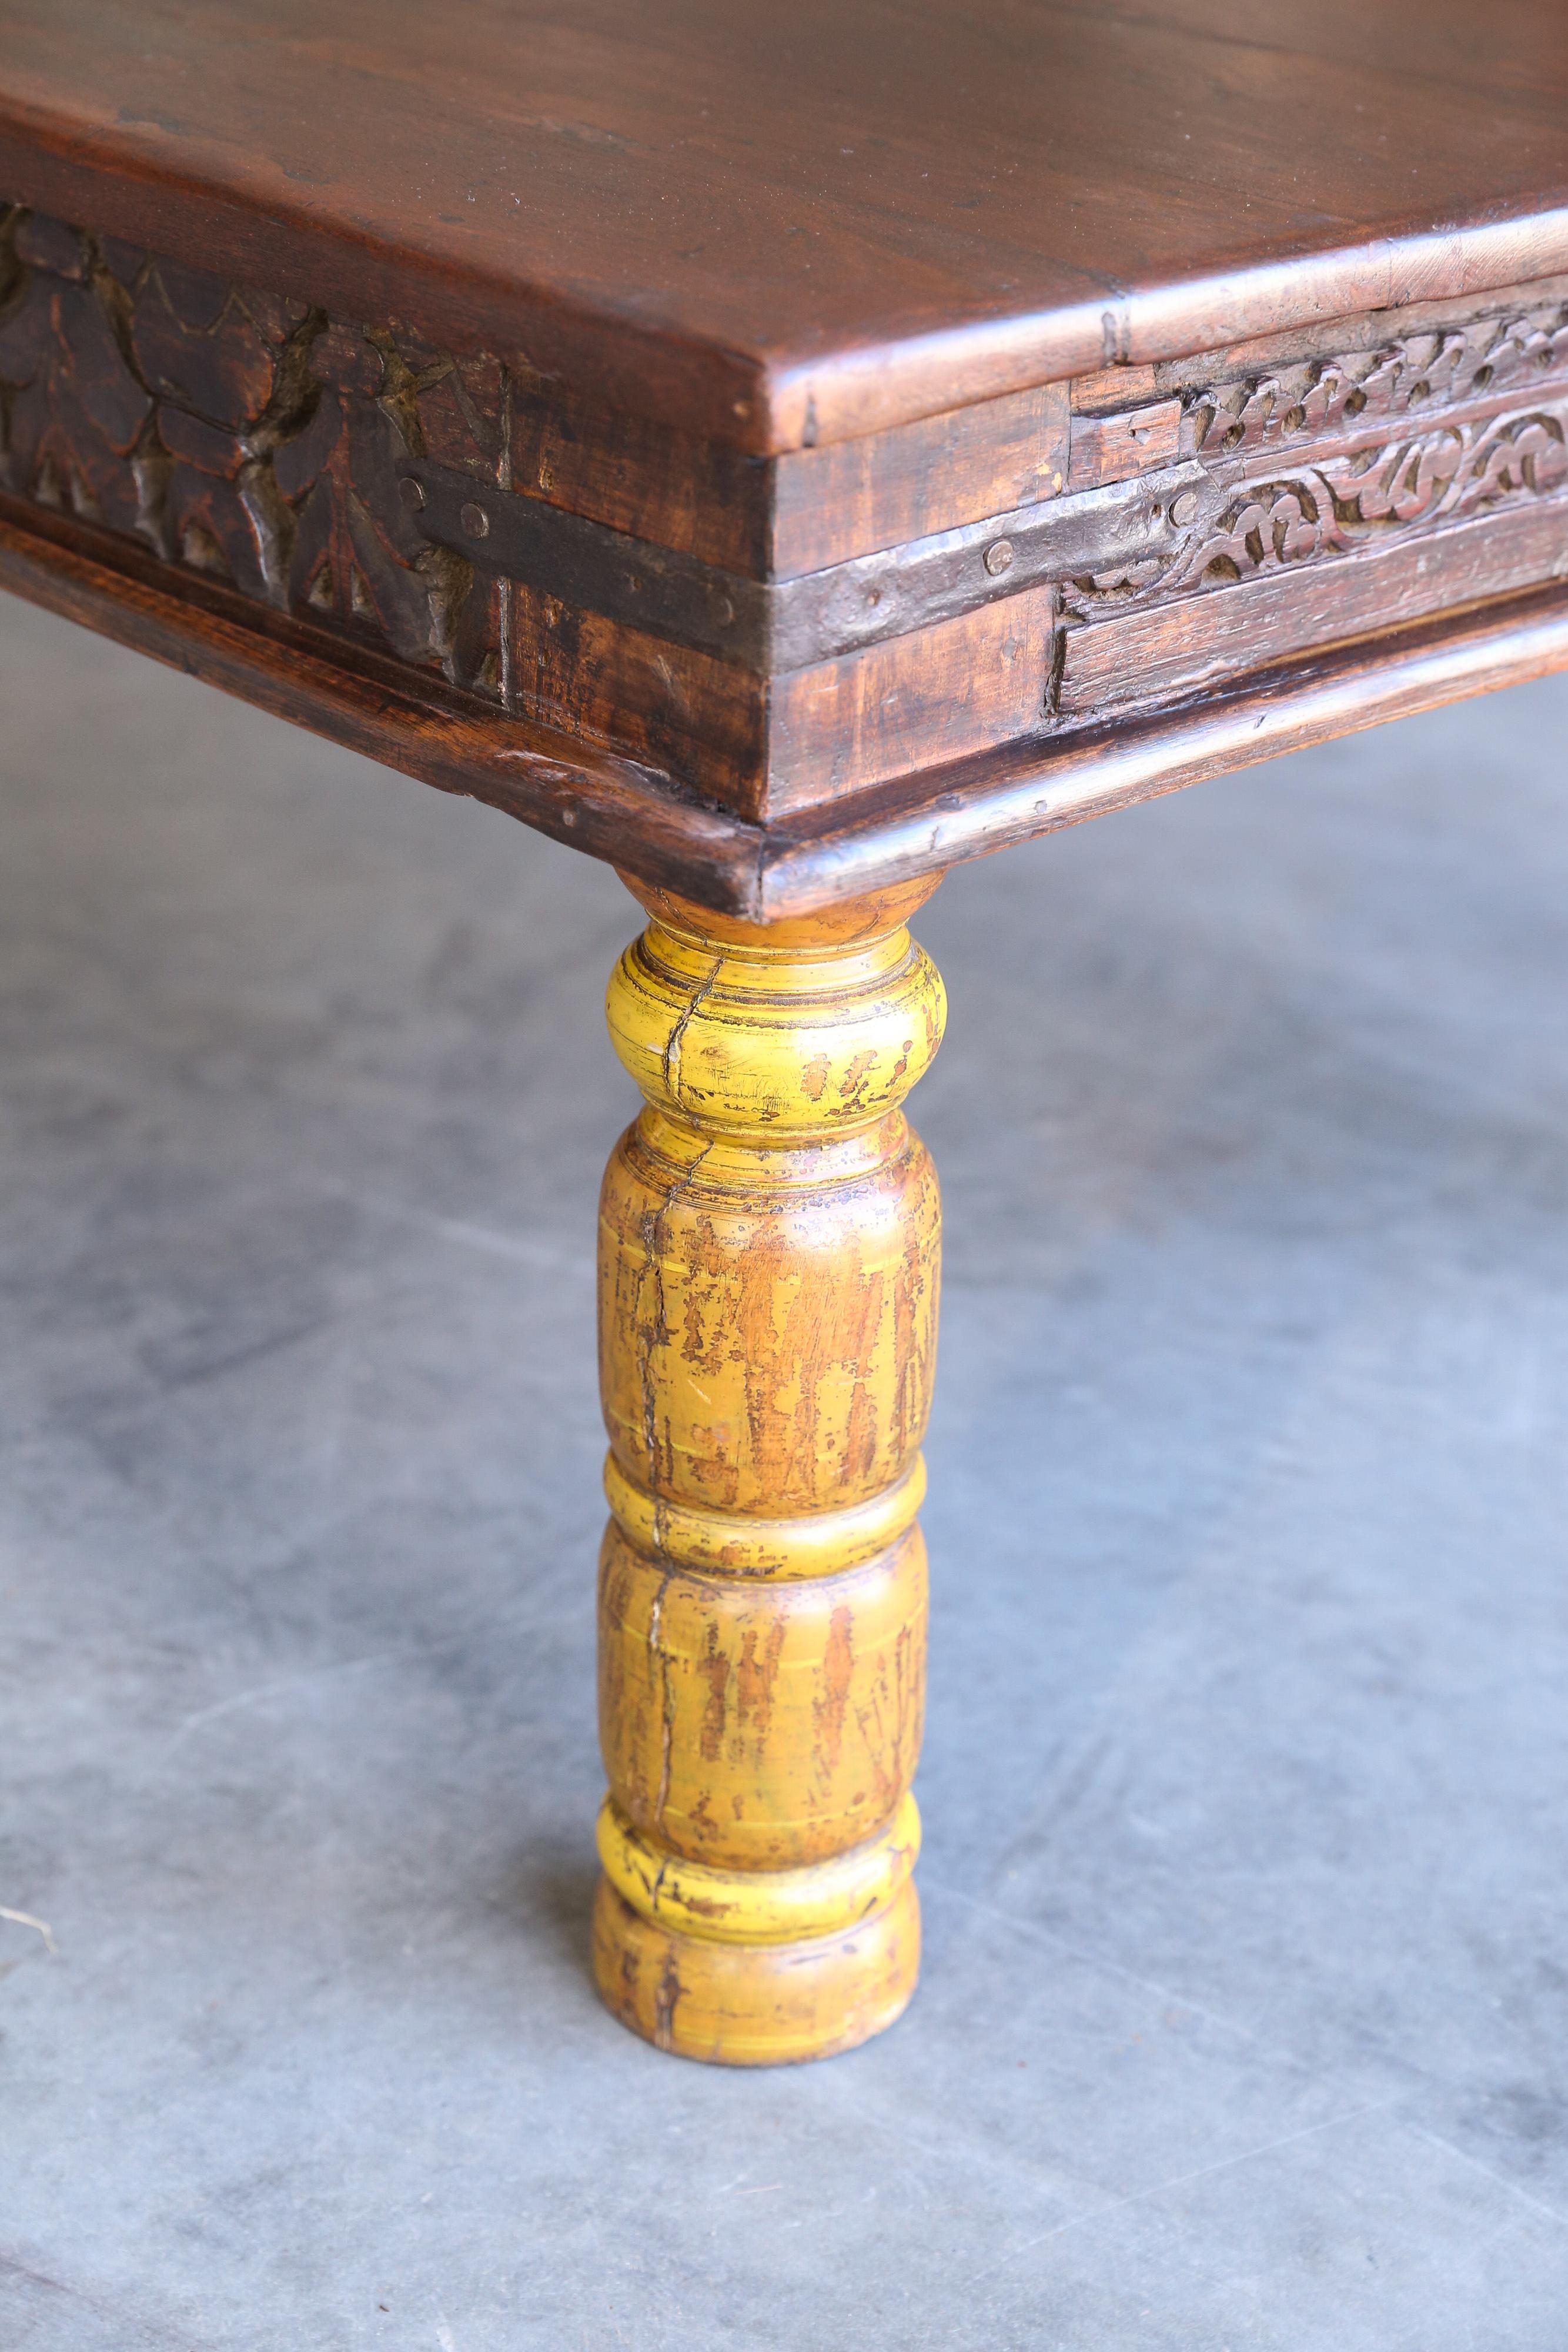 Tea plantation furniture are part of Anglo-Indian heritage and are highly valued for the quality of materials used and for the high standard of craftsmanship. This elegant coffee table is a Classic example of on such furniture. It is made of fine